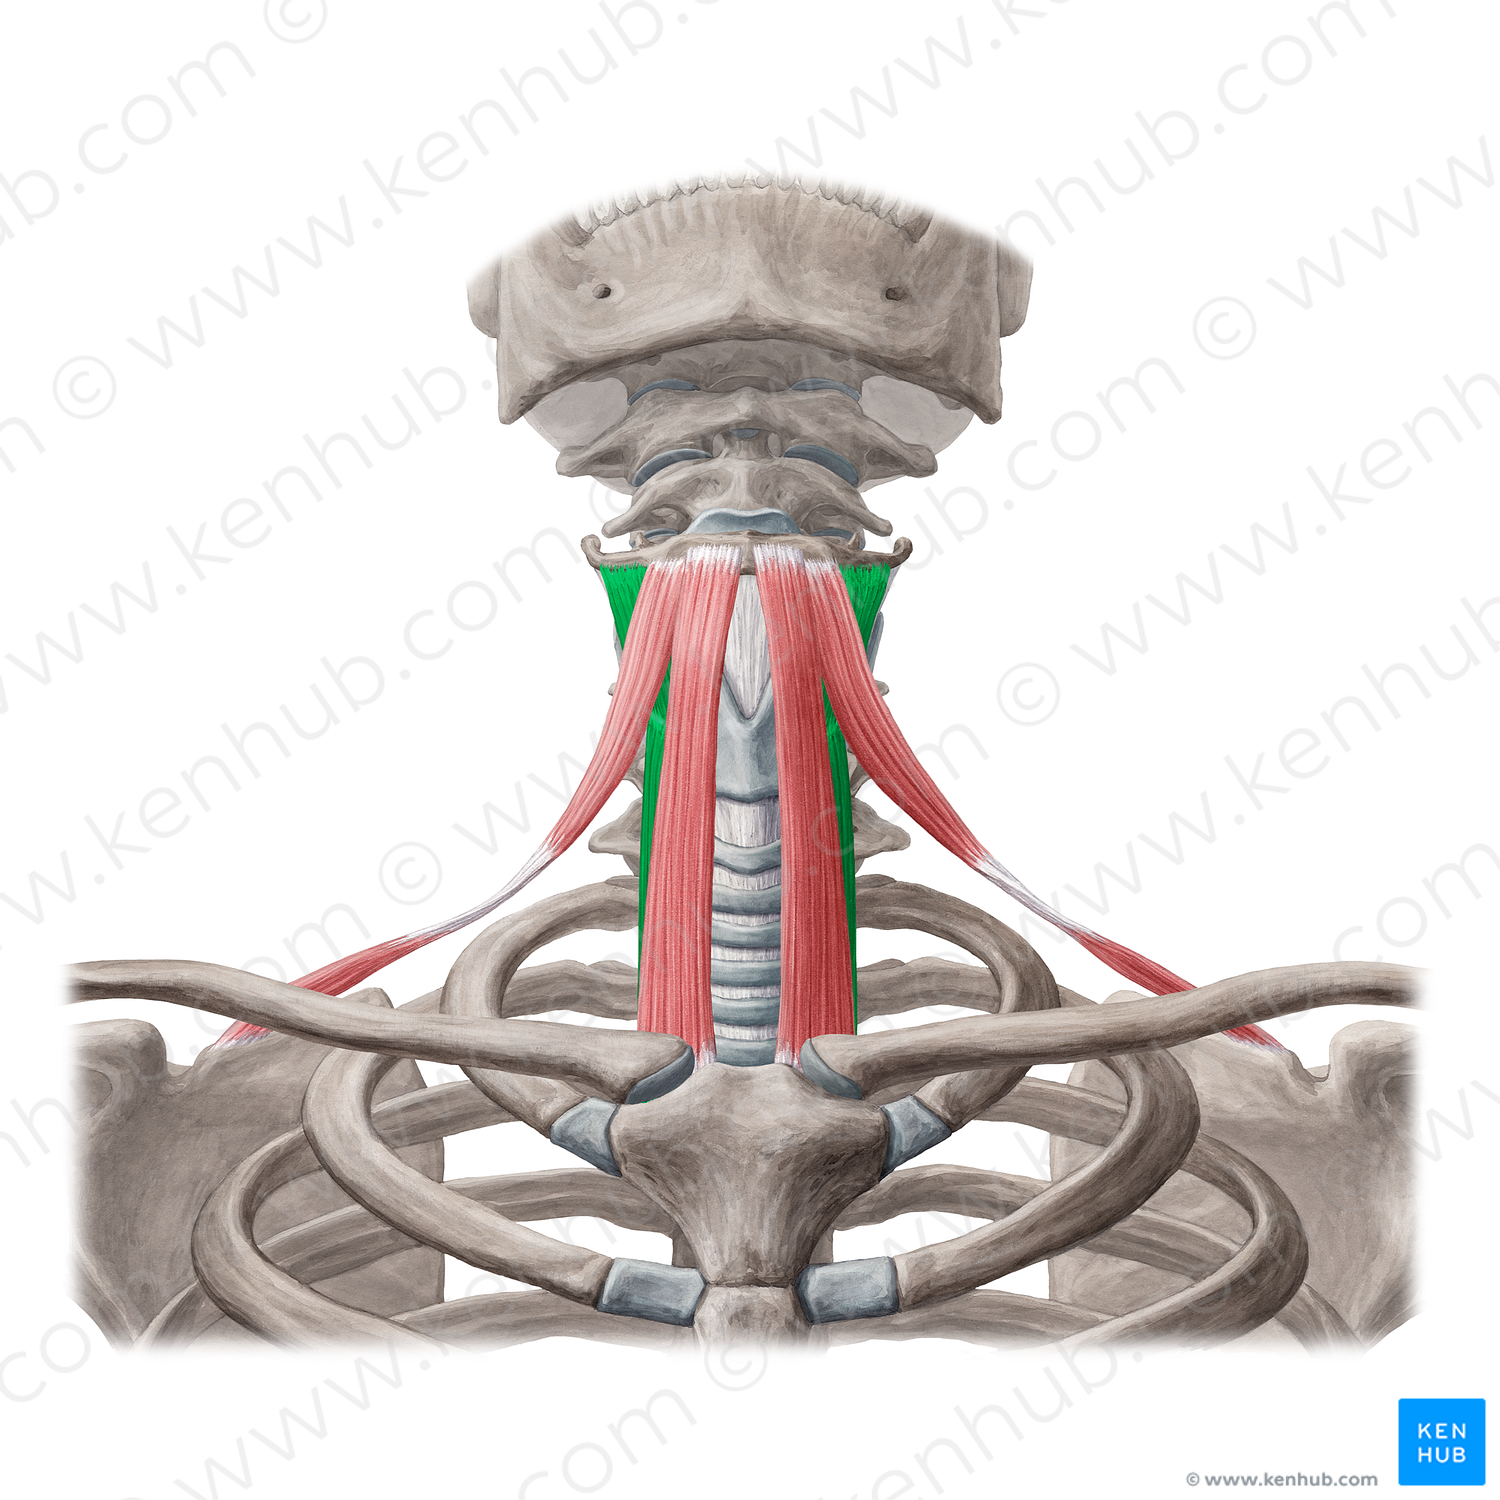 Thyrohyoid muscle & sternothyroid muscle (#6100)